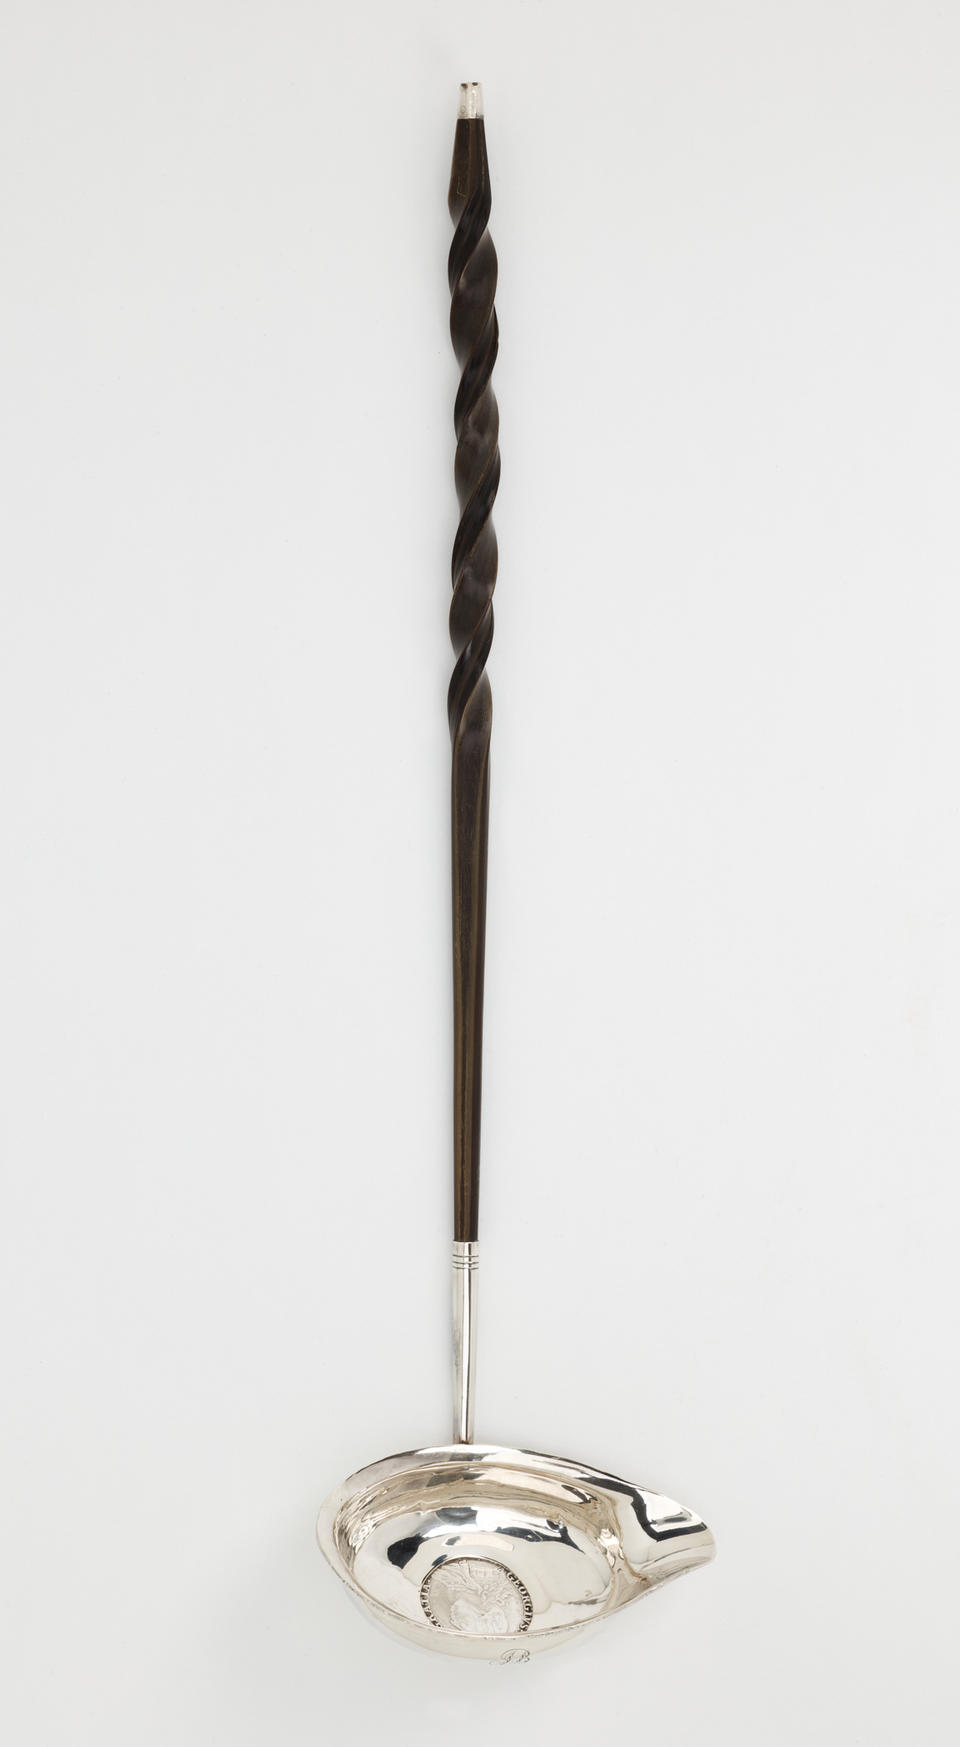 A silver and baleen coin ladle. The handle is twisted and dark and the ladle is silver with a small coin in the center. 